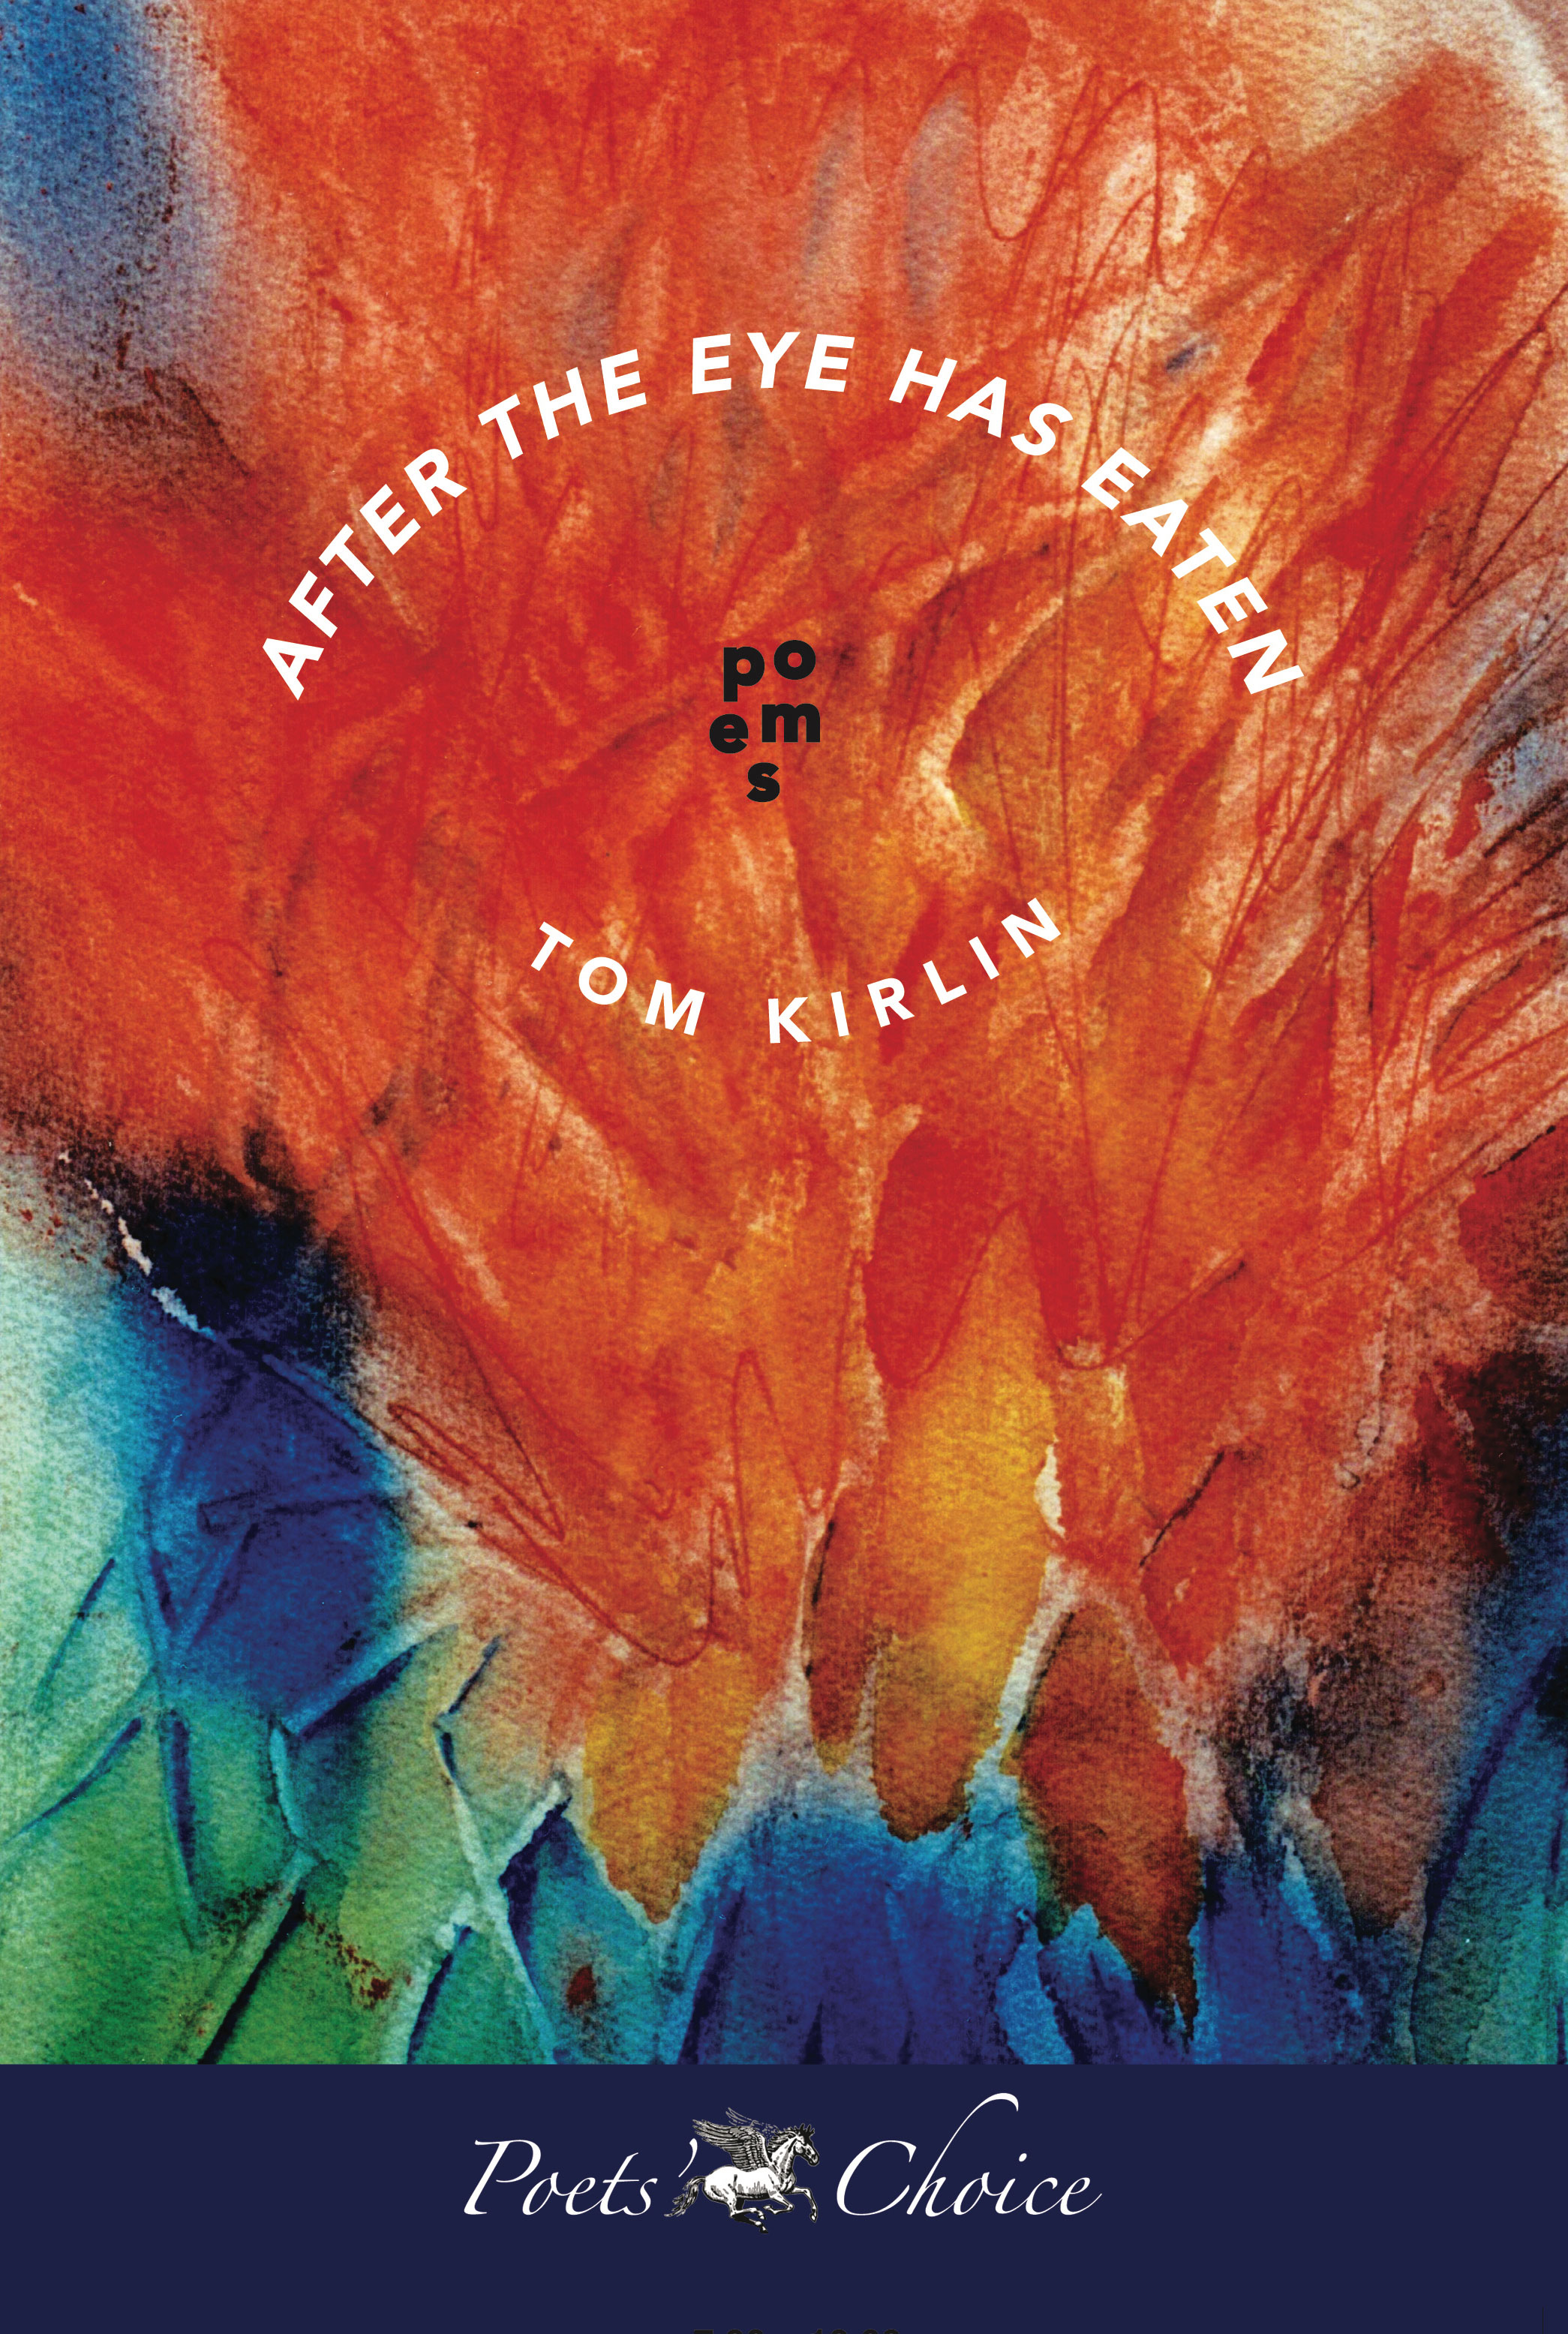 Poets' Choice Publishing is Pleased to Announce the Third Volume of Poetry by Tom Kirlin with the Intriguing, Post-Modern Title, "AFTER THE EYE HAS EATEN"